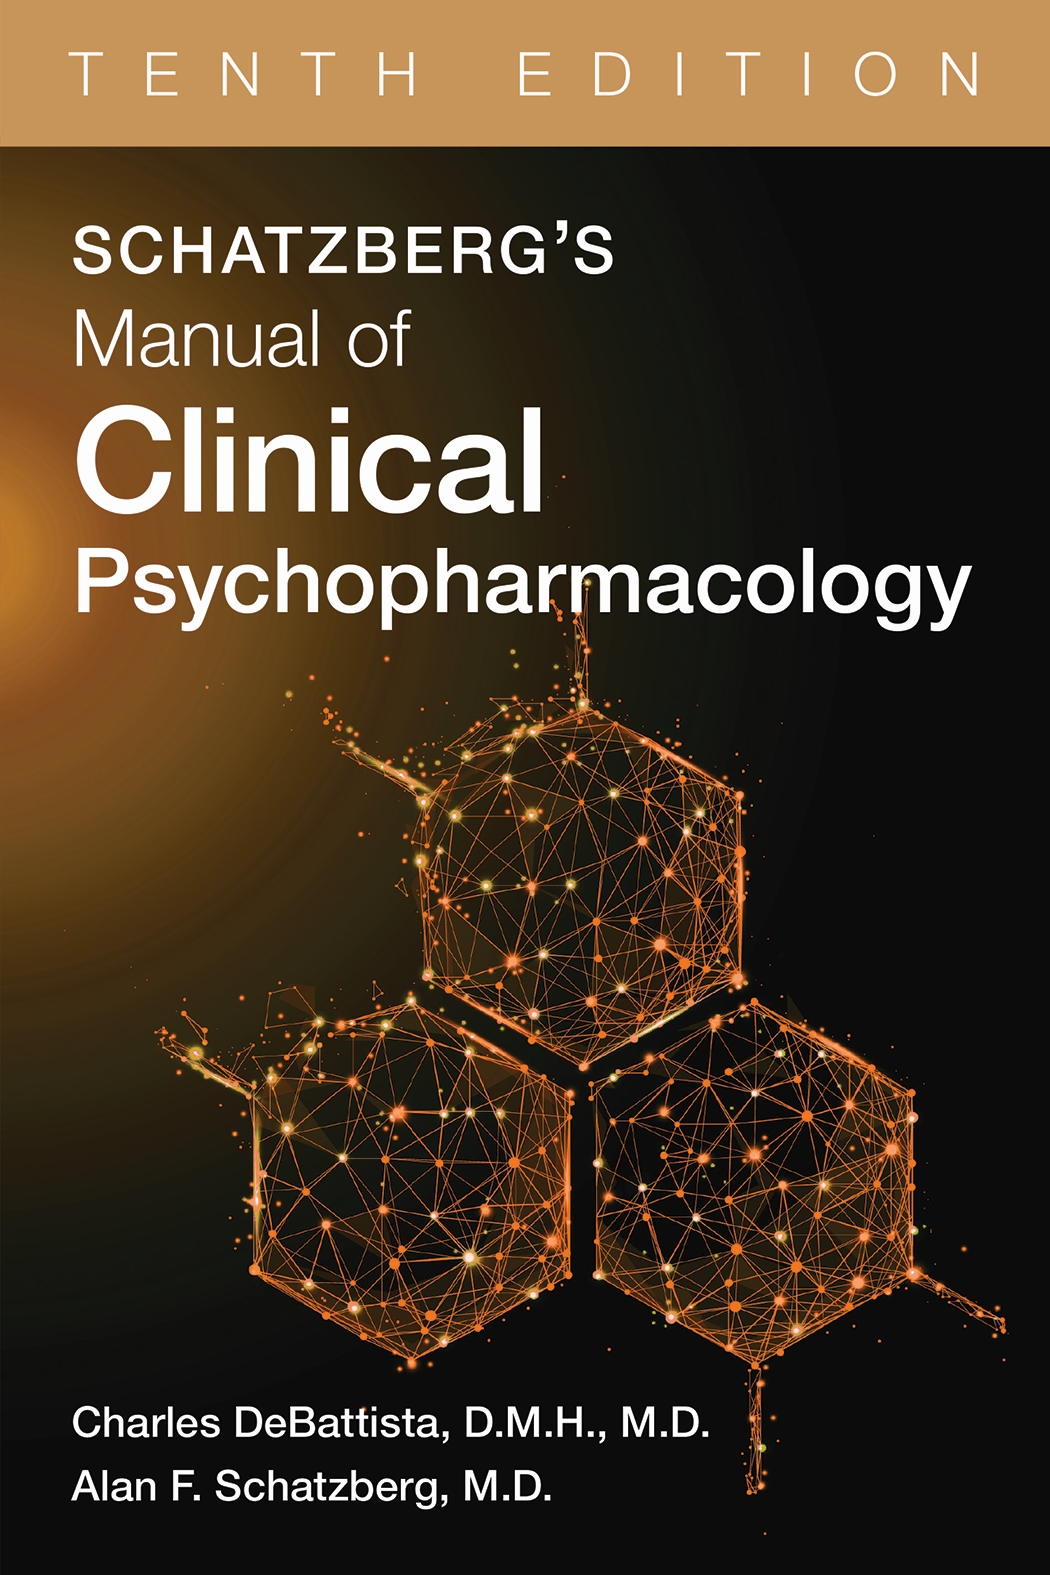 Go to Schatzberg’s Manual of Clinical Psychopharmacology